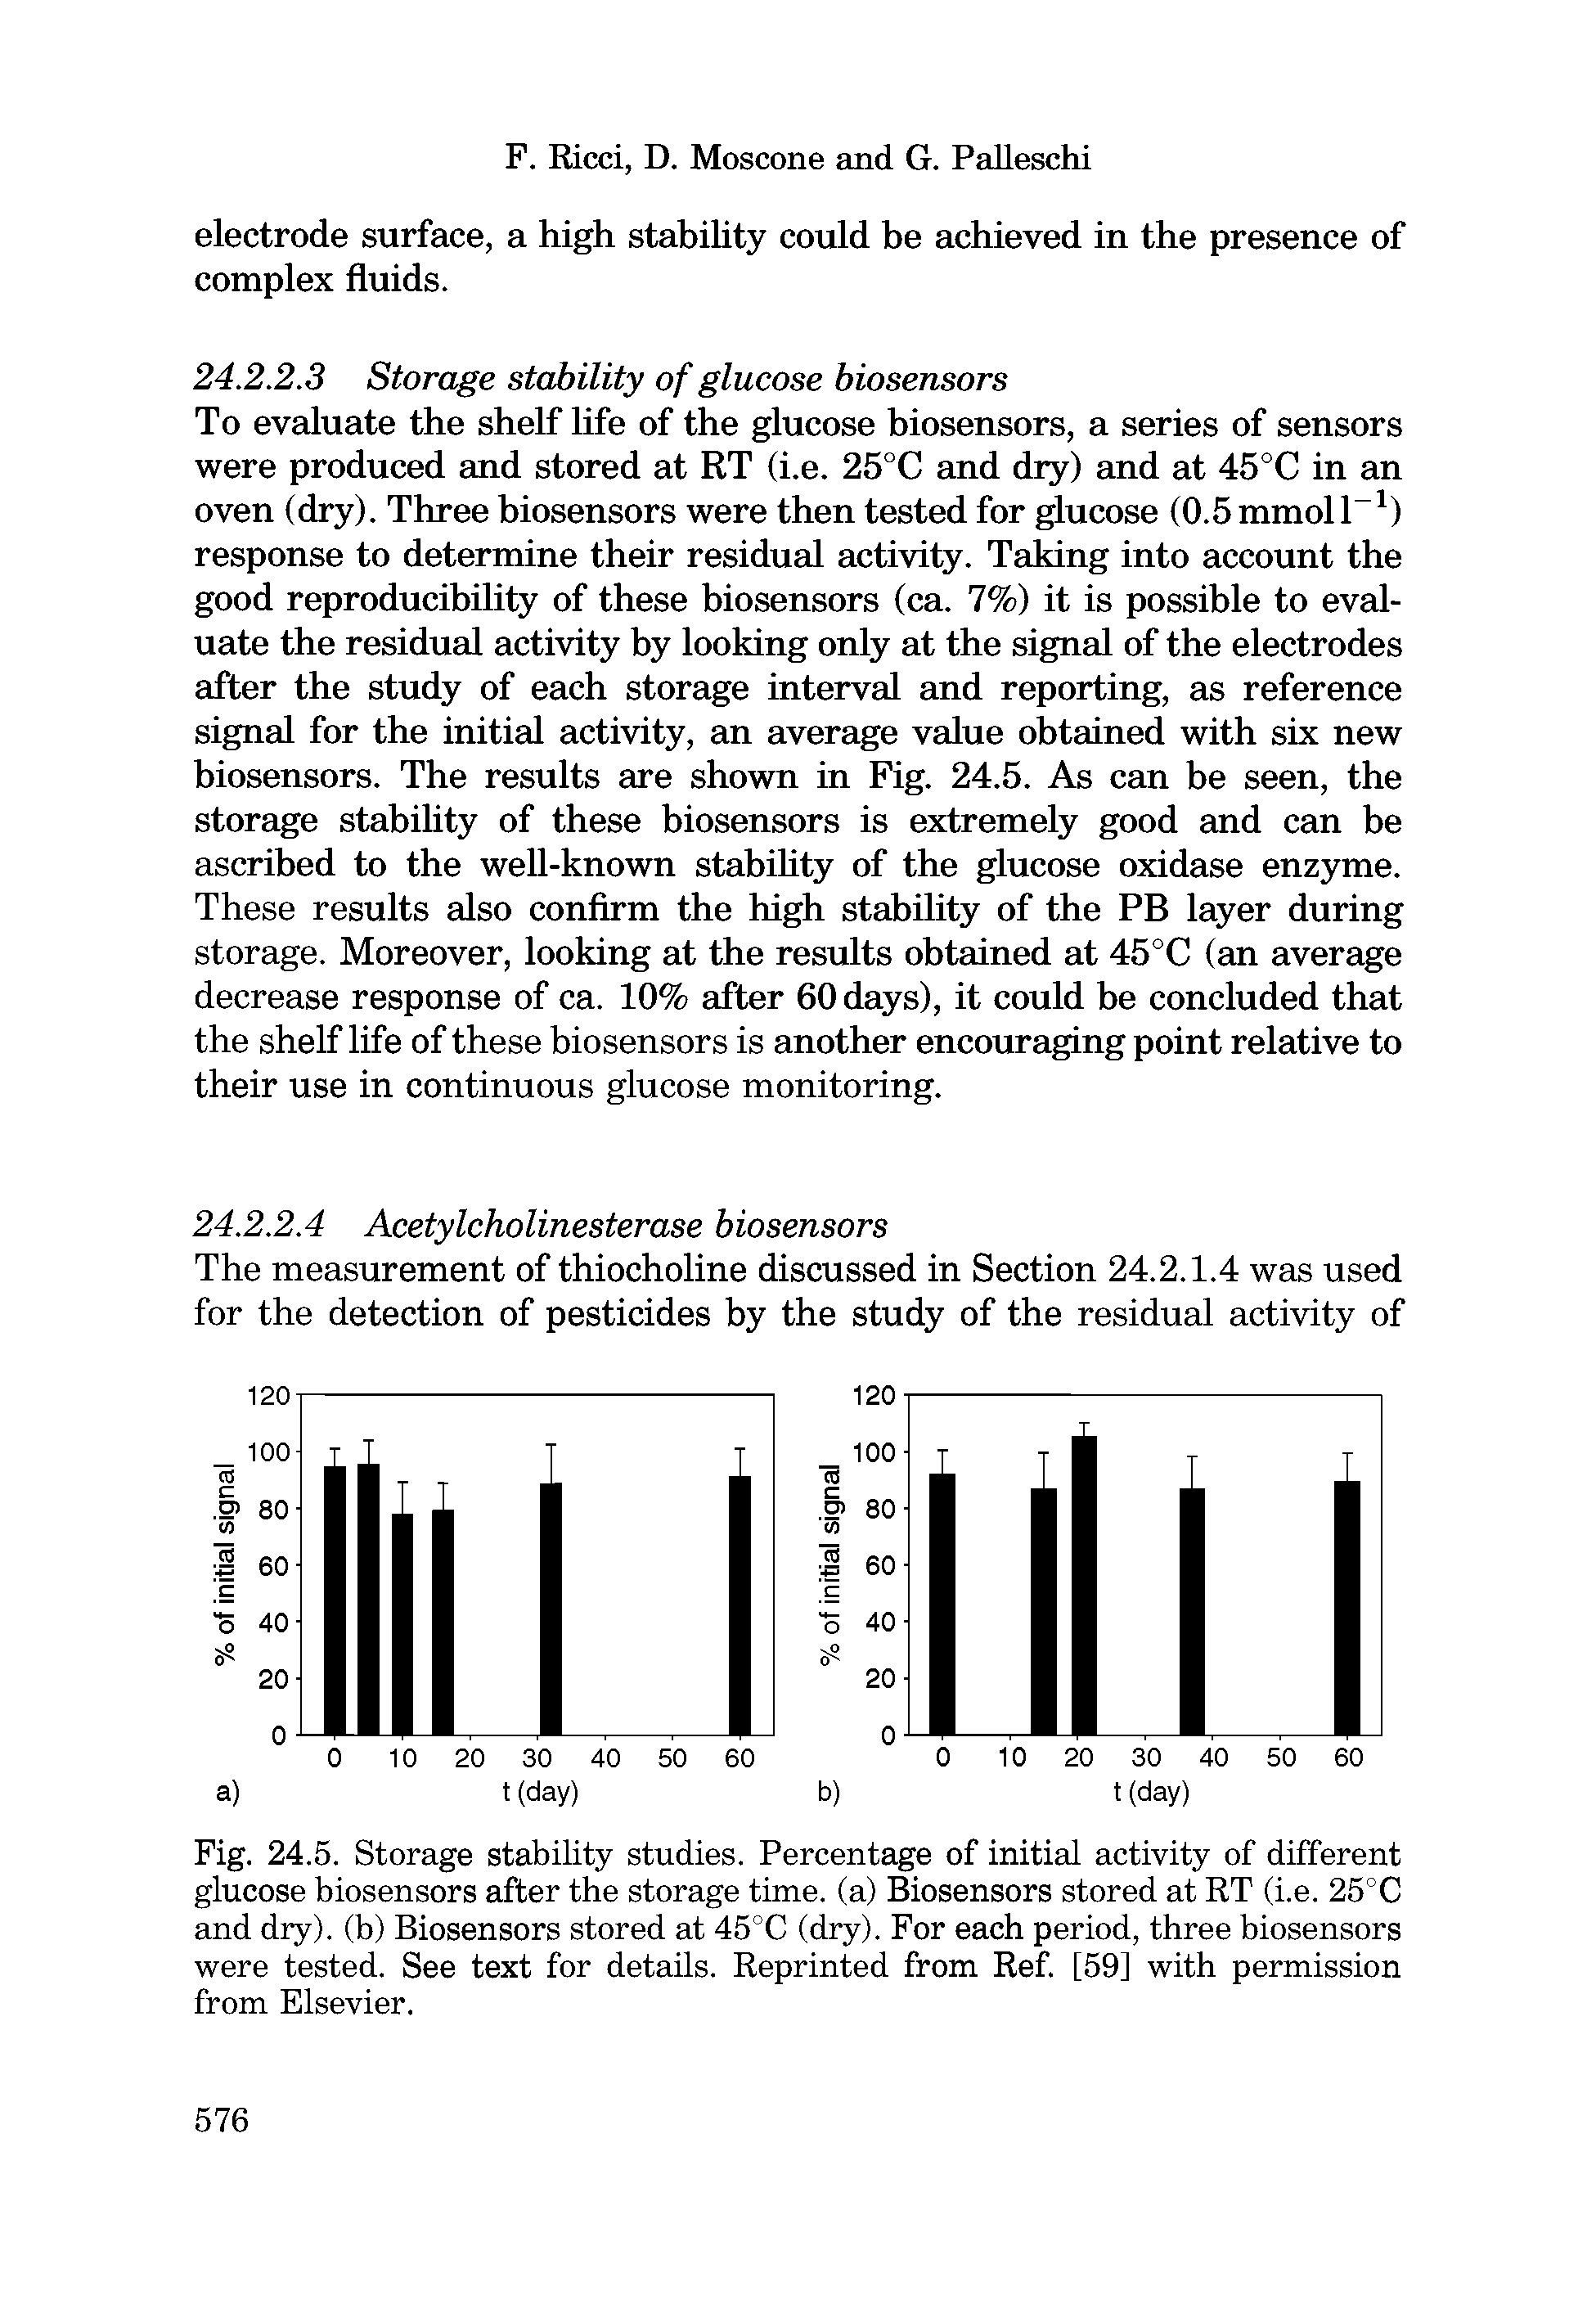 Fig. 24.5. Storage stability studies. Percentage of initial activity of different glucose biosensors after the storage time, (a) Biosensors stored at RT (i.e. 25°C and dry), (b) Biosensors stored at 45°C (dry). For each period, three biosensors were tested. See text for details. Reprinted from Ref. [59] with permission from Elsevier.